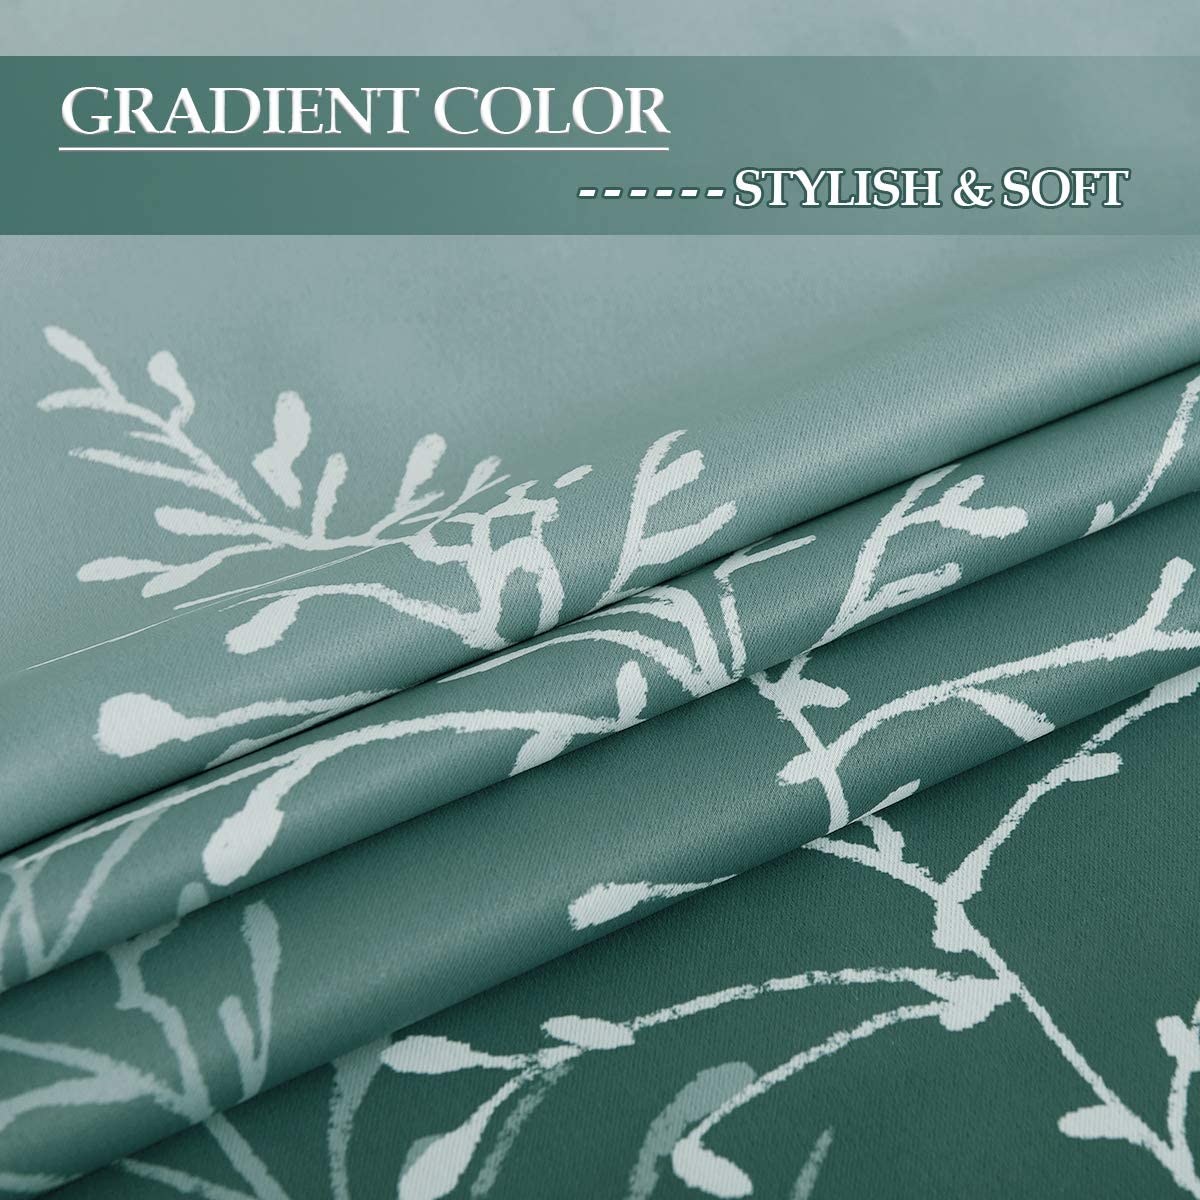 Ombre Tree Branch Grommet Blackout Curtains For Living Room And Bedroom 2 Panels KGORGE Store